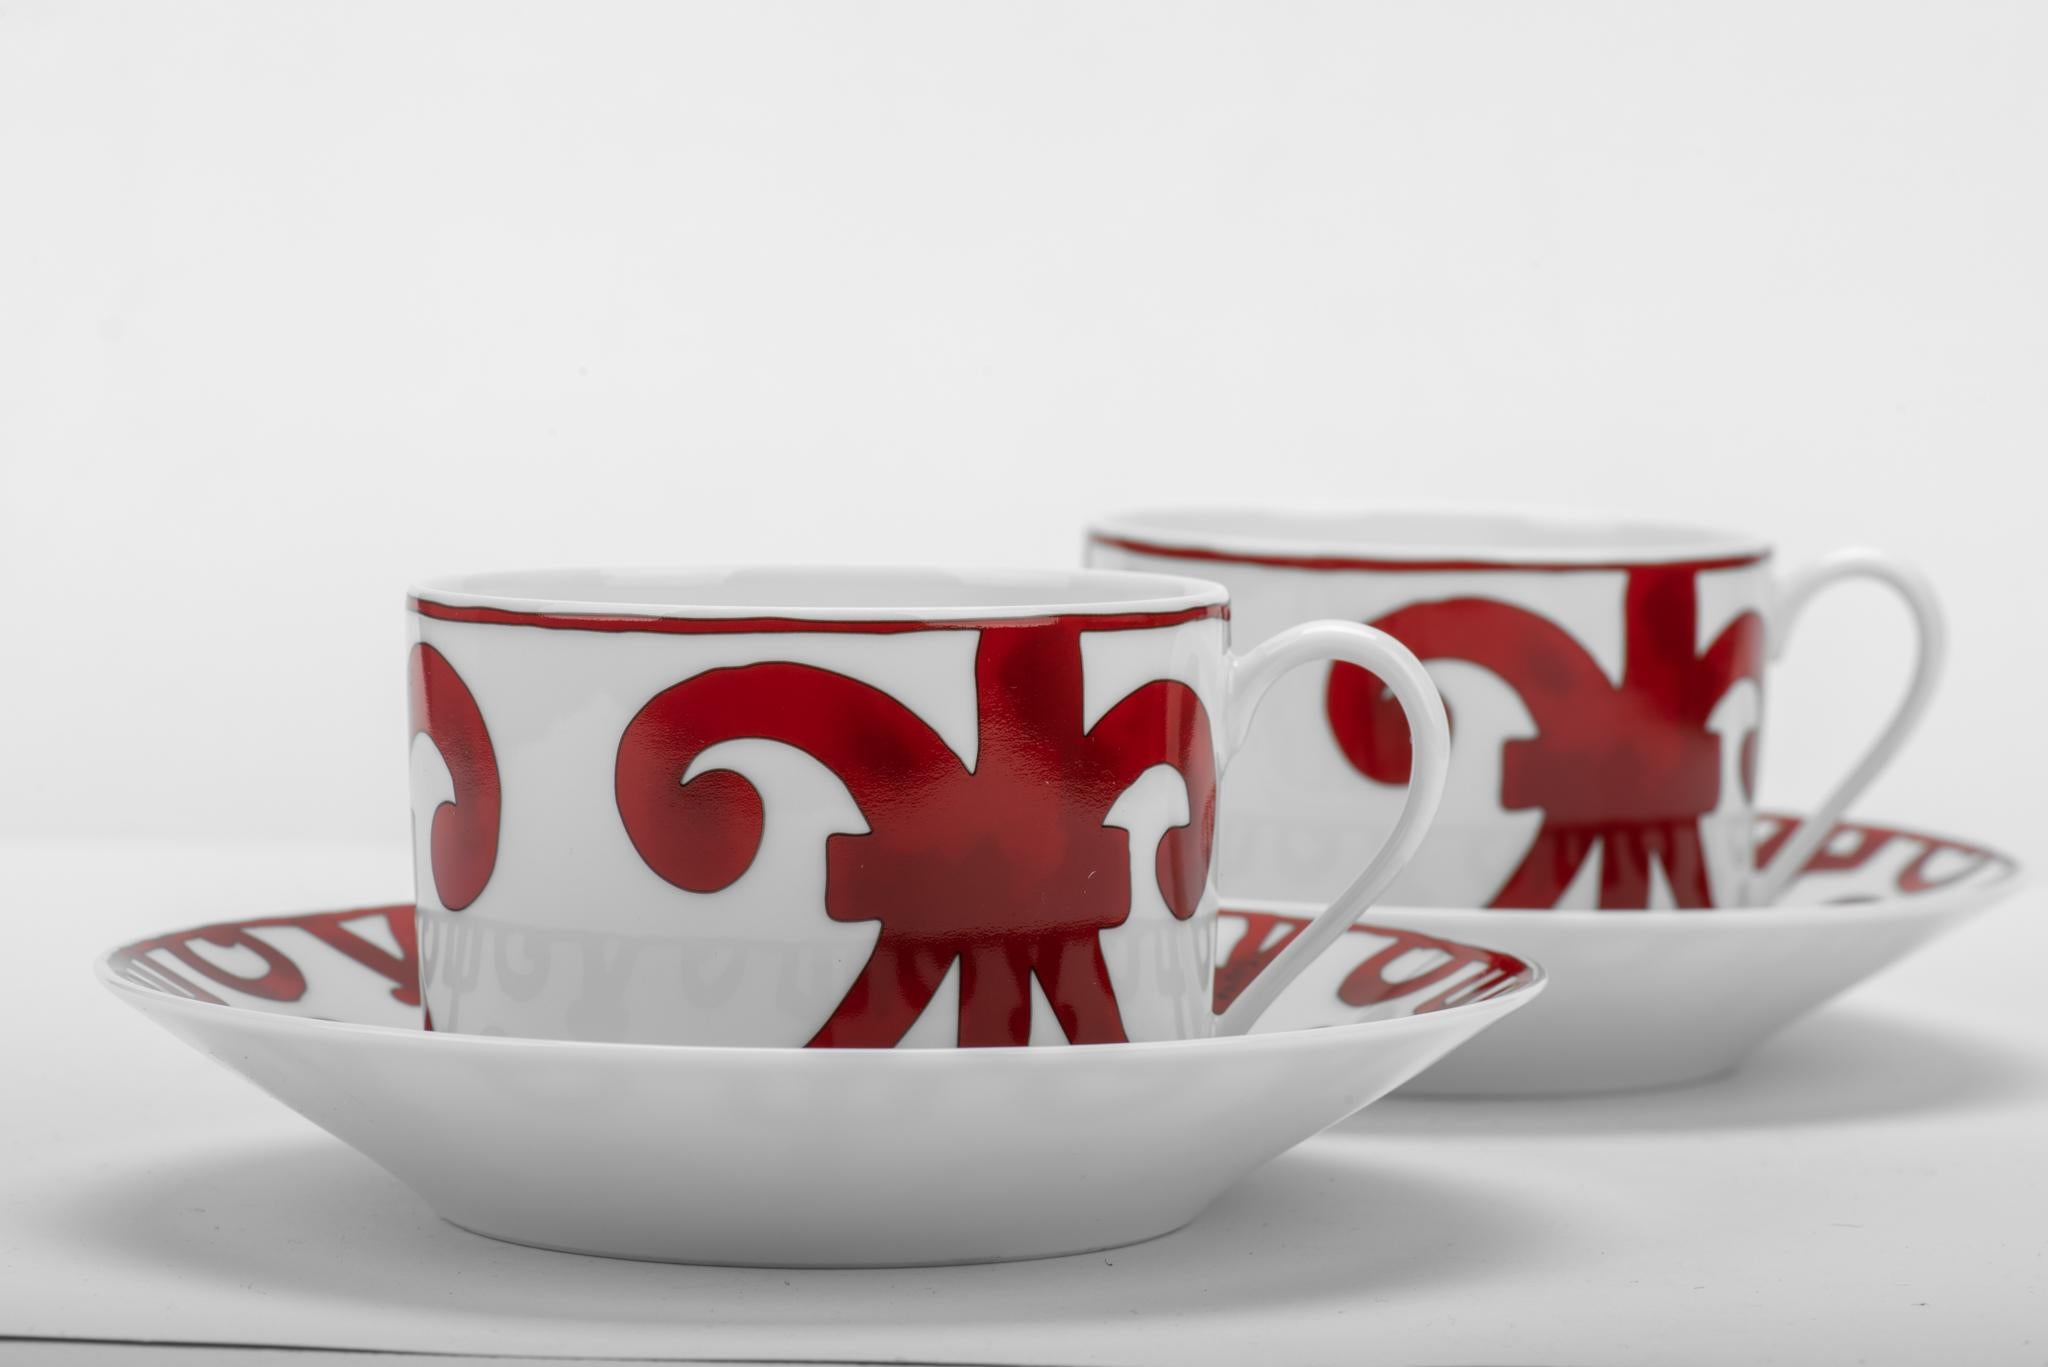 Hermès set of 2 breakfast cup and saucer red and white . Brand new, come with original box.